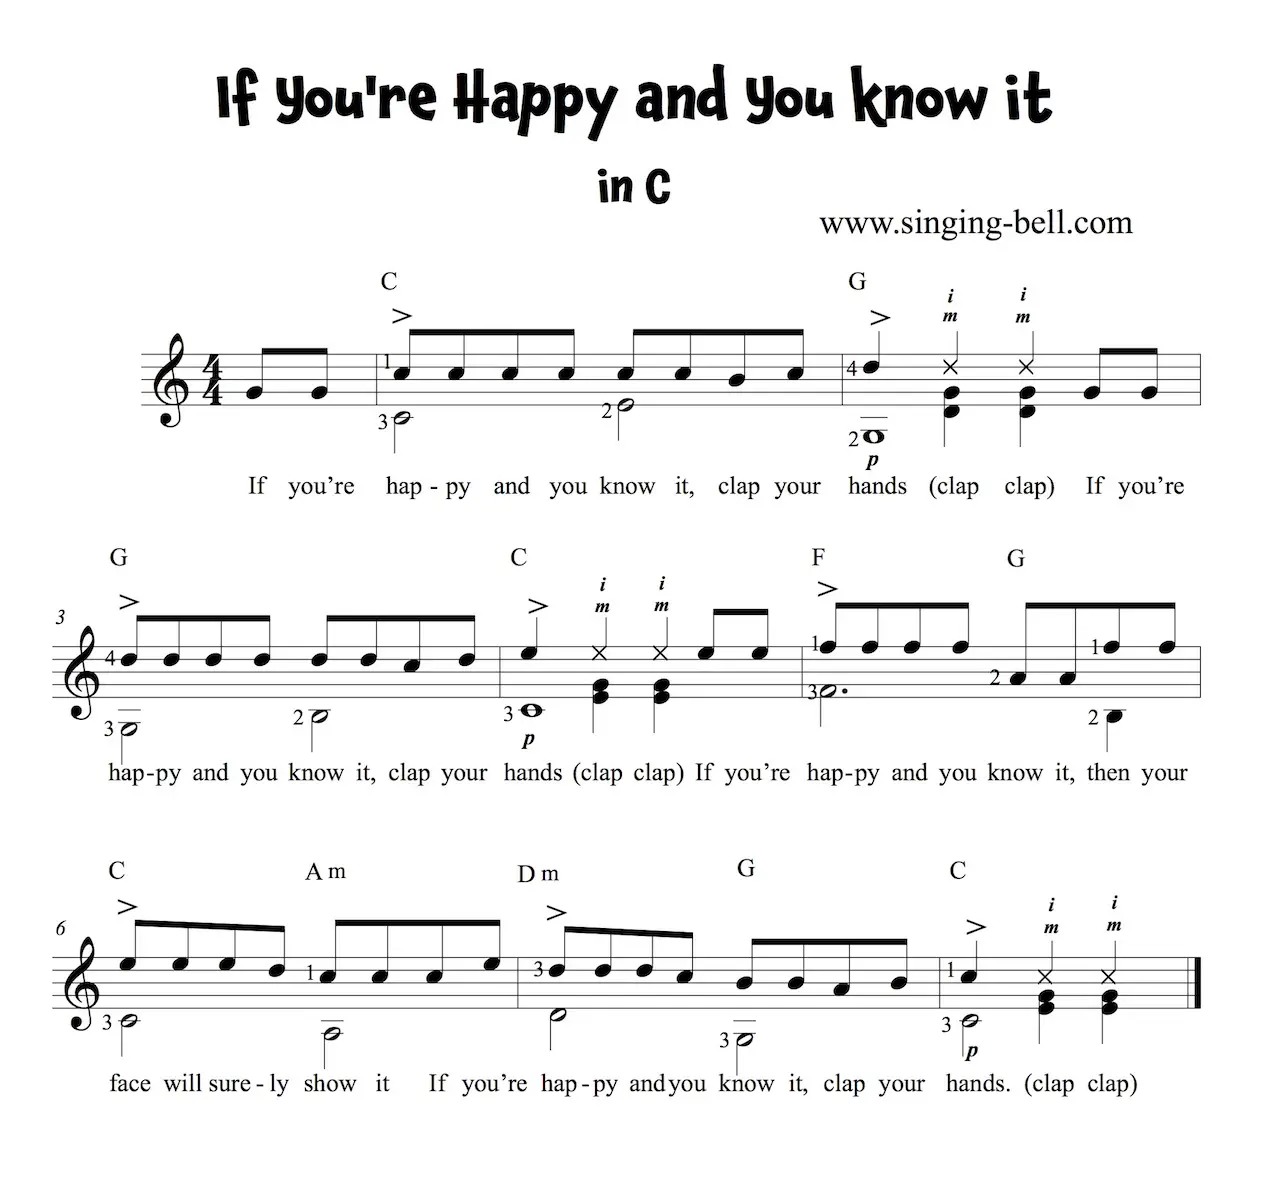 If You're Happy and You know it Easy Guitar Sheet Music in C.